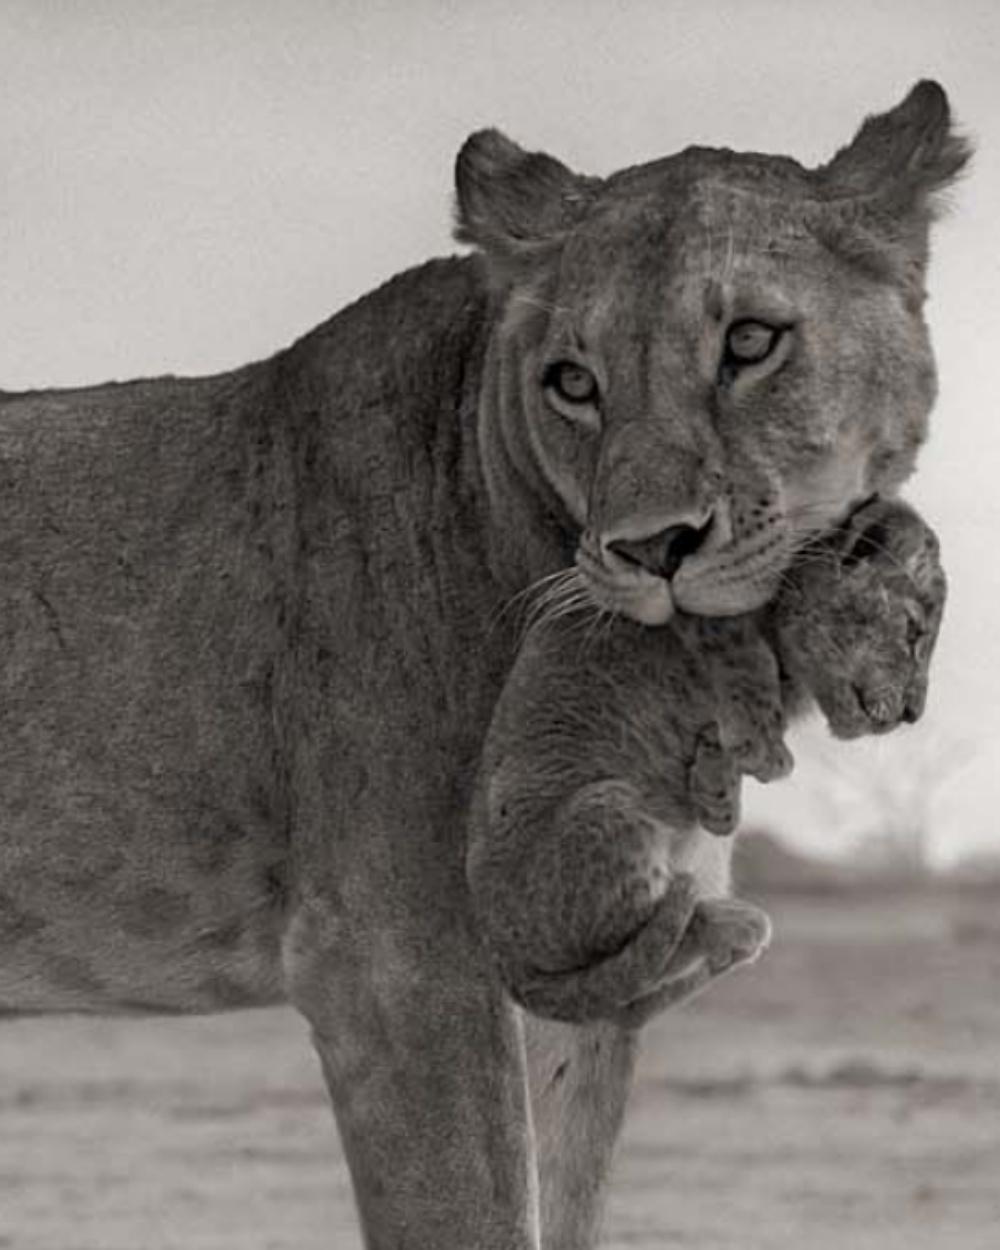 NICK BRANDT (*1966, England)
Lioness with Cub in Mouth, Amboseli
2012
Platinum print
Sheet 71,12 x 88,9 cm (28 x 35 in.)
Edition of 15, plus AP's; Ed. no. 2/15
print only

Nick Brandt is a contemporary English photographer. His work focuses on the